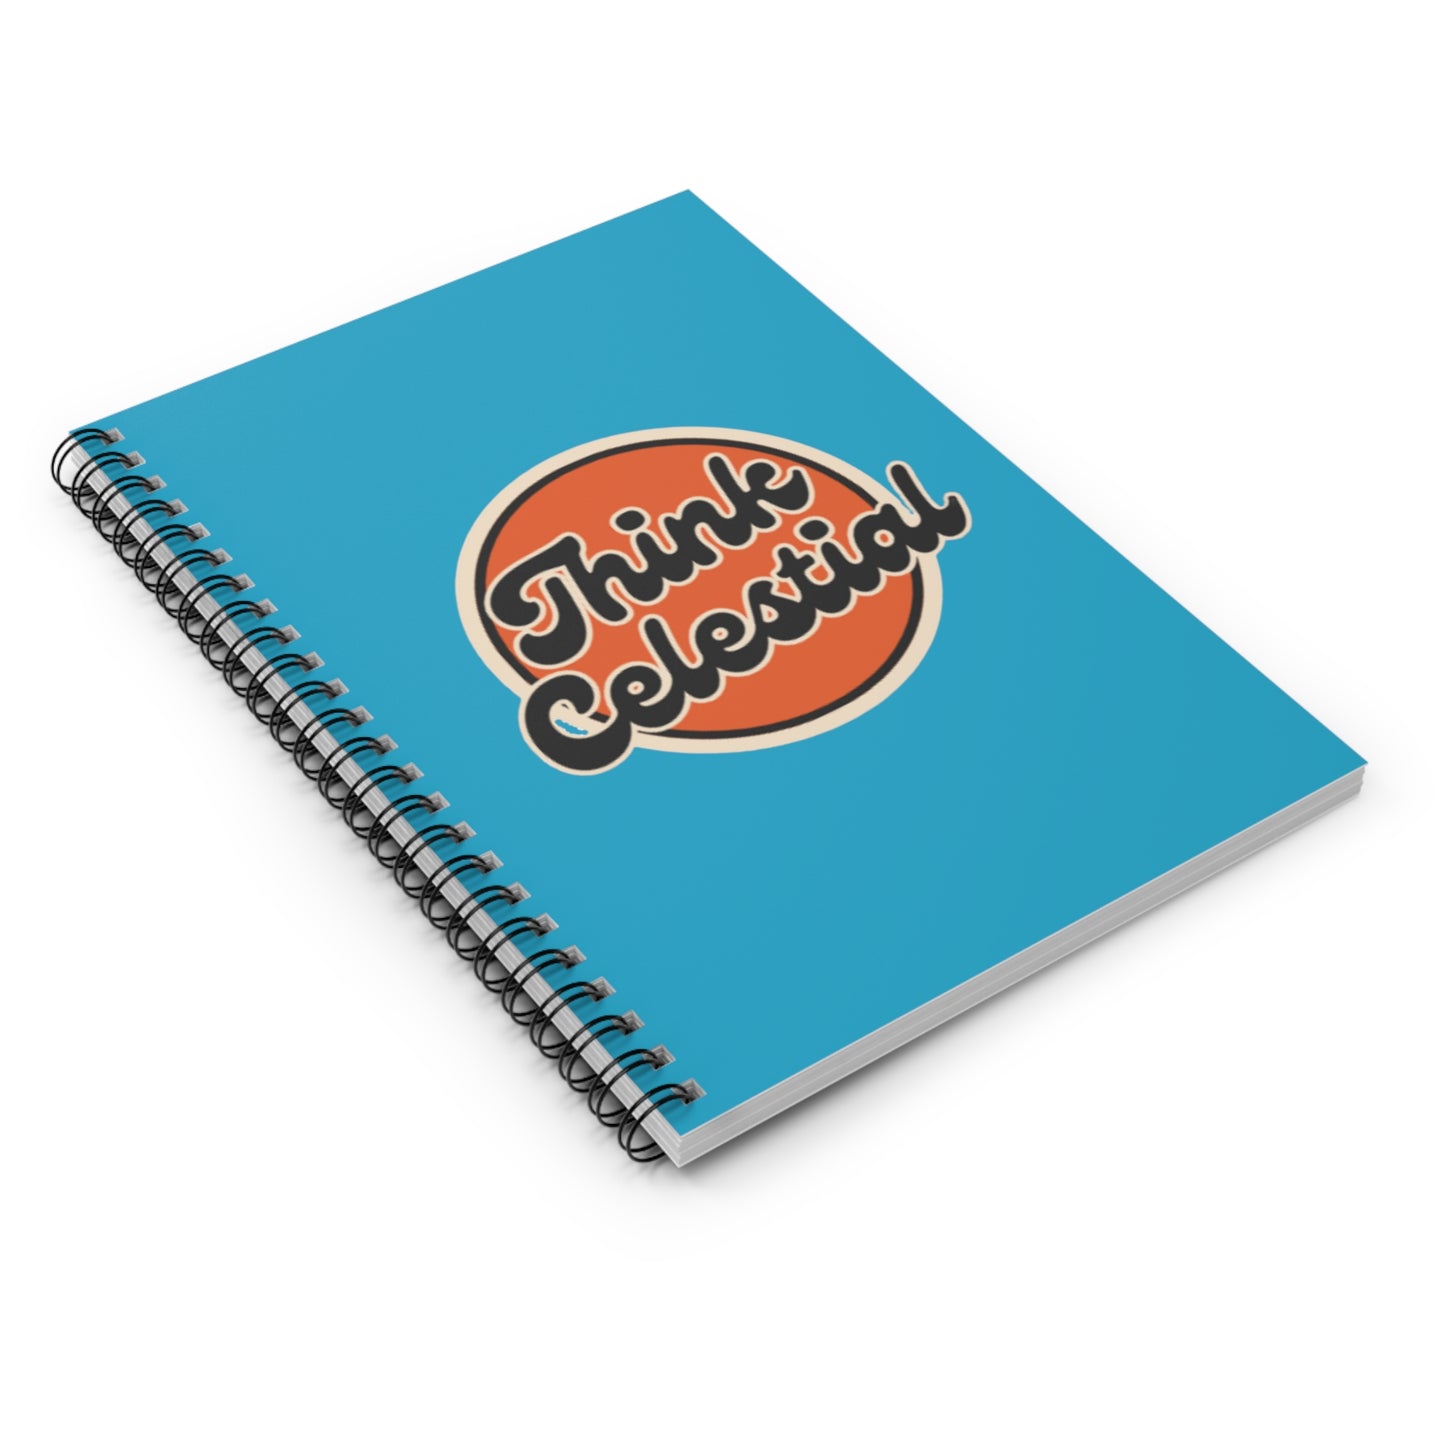 Think Celestial Retro Spiral Notebook - Ruled Line